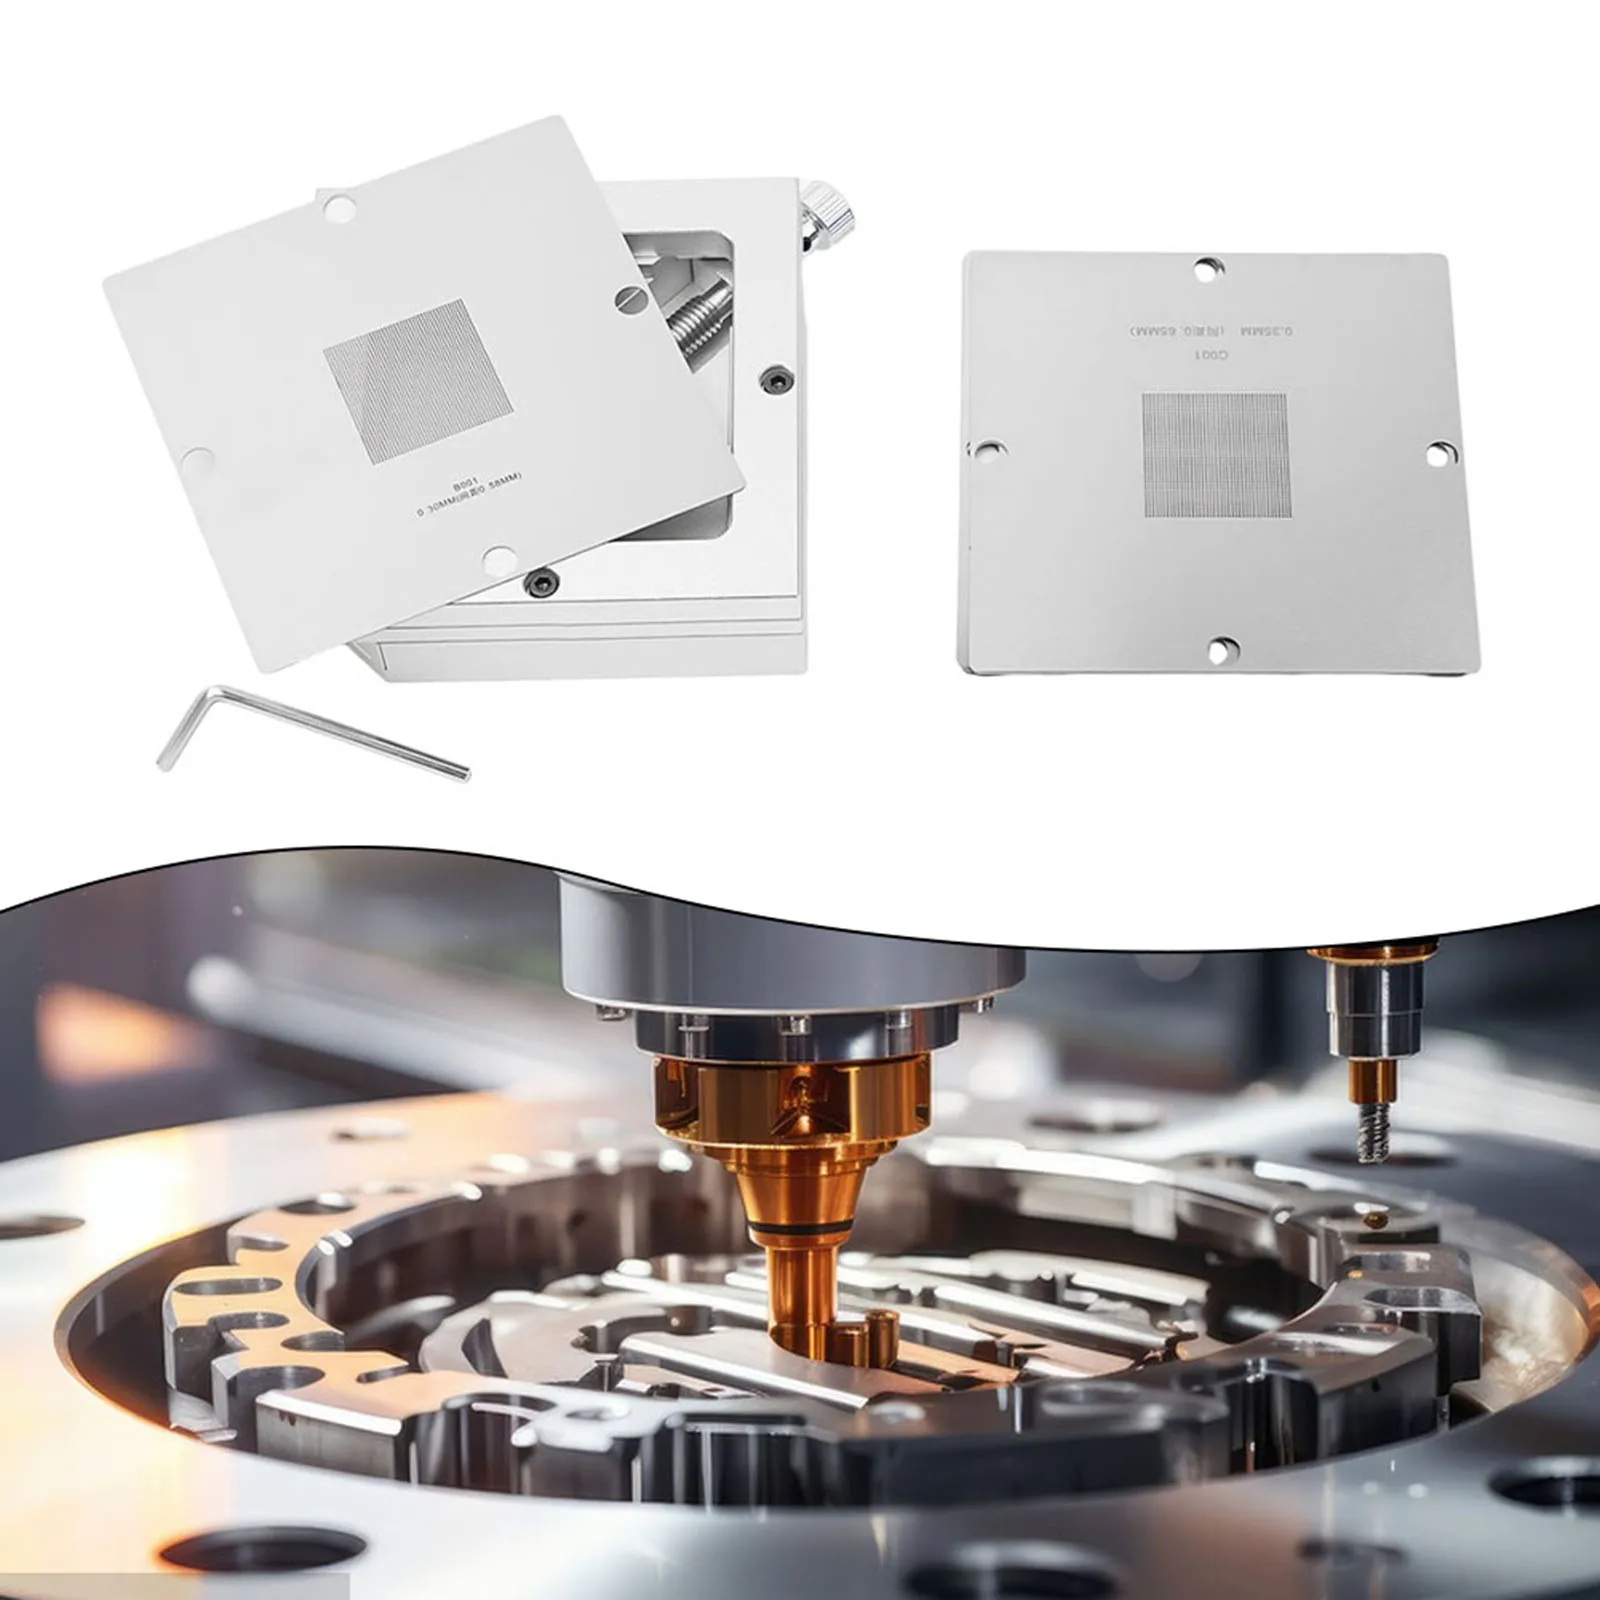 BGA Reballing Kit 90mm Reball Station Fixture Jig With 10PCS Universal Stencil Set For Precise PCB Template Repair CNC Tool relife rl 601ma 9 in 1 universal cpu reballing stencil platform for a8 a16 ip6 14 pro max ic chip planting tin template fixture